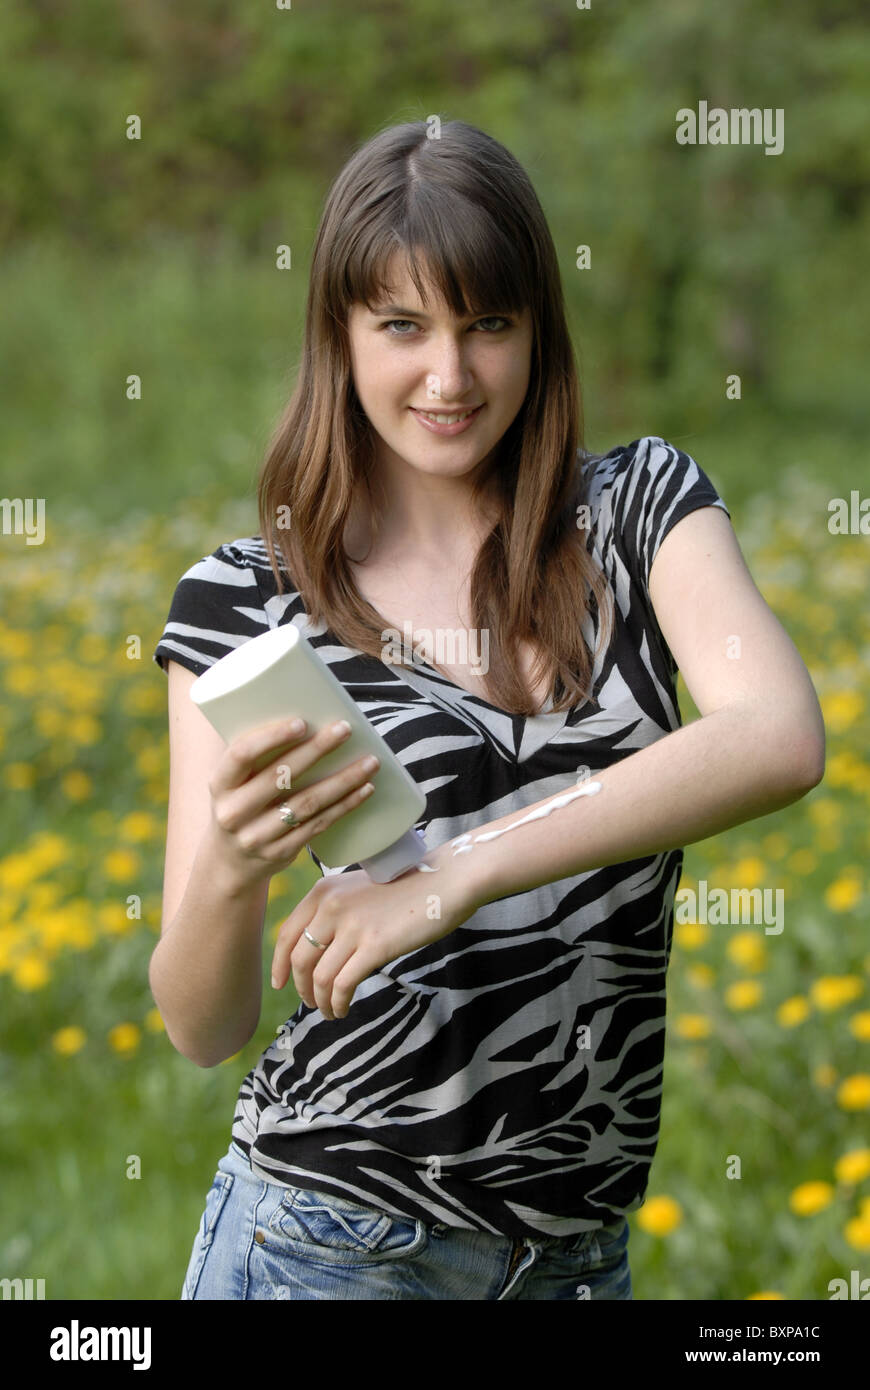 Young woman getting creamed Stock Photo